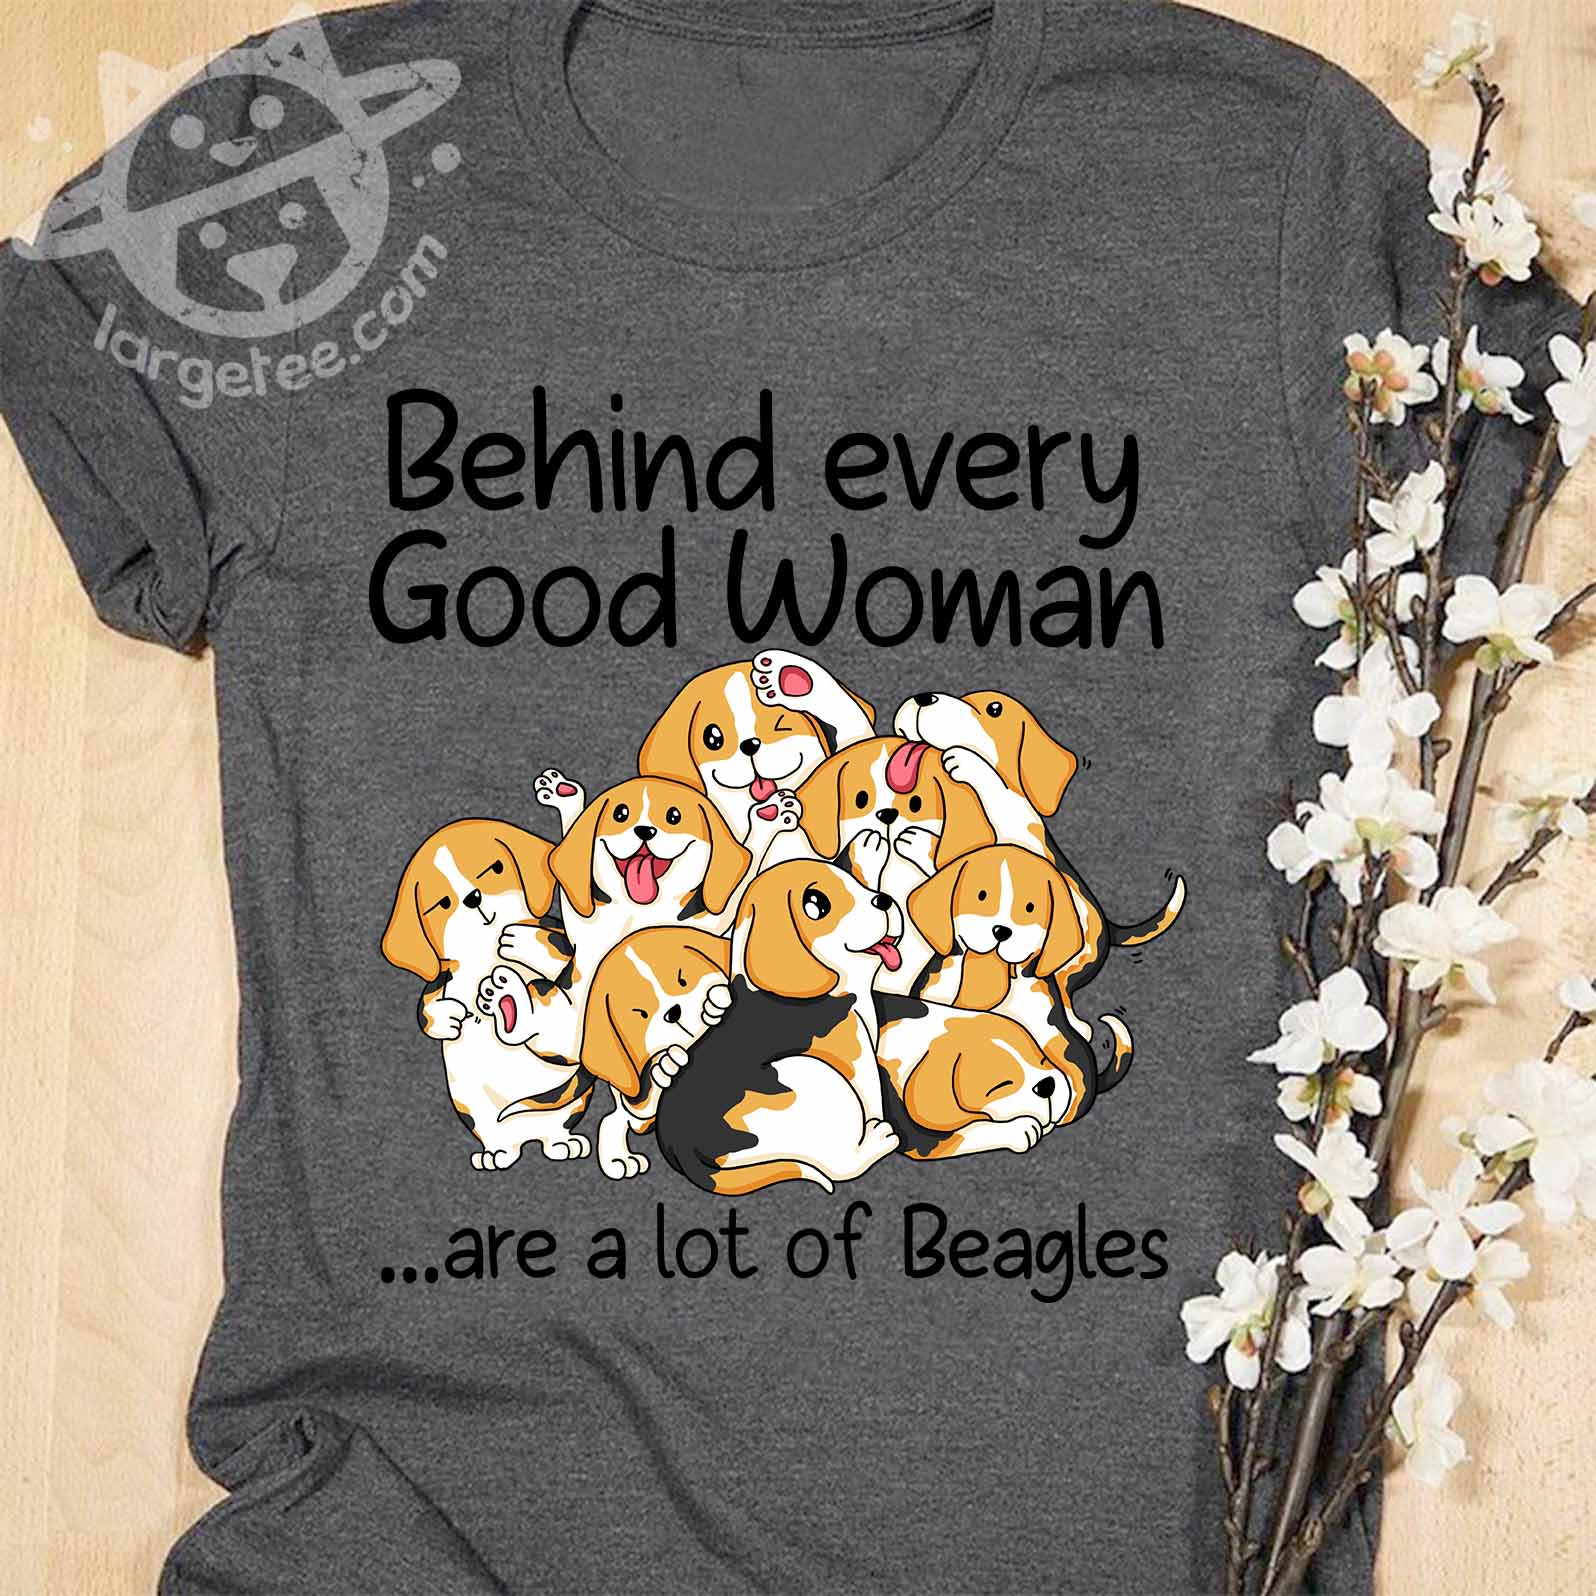 Behind every good woman are a lot of Beagles